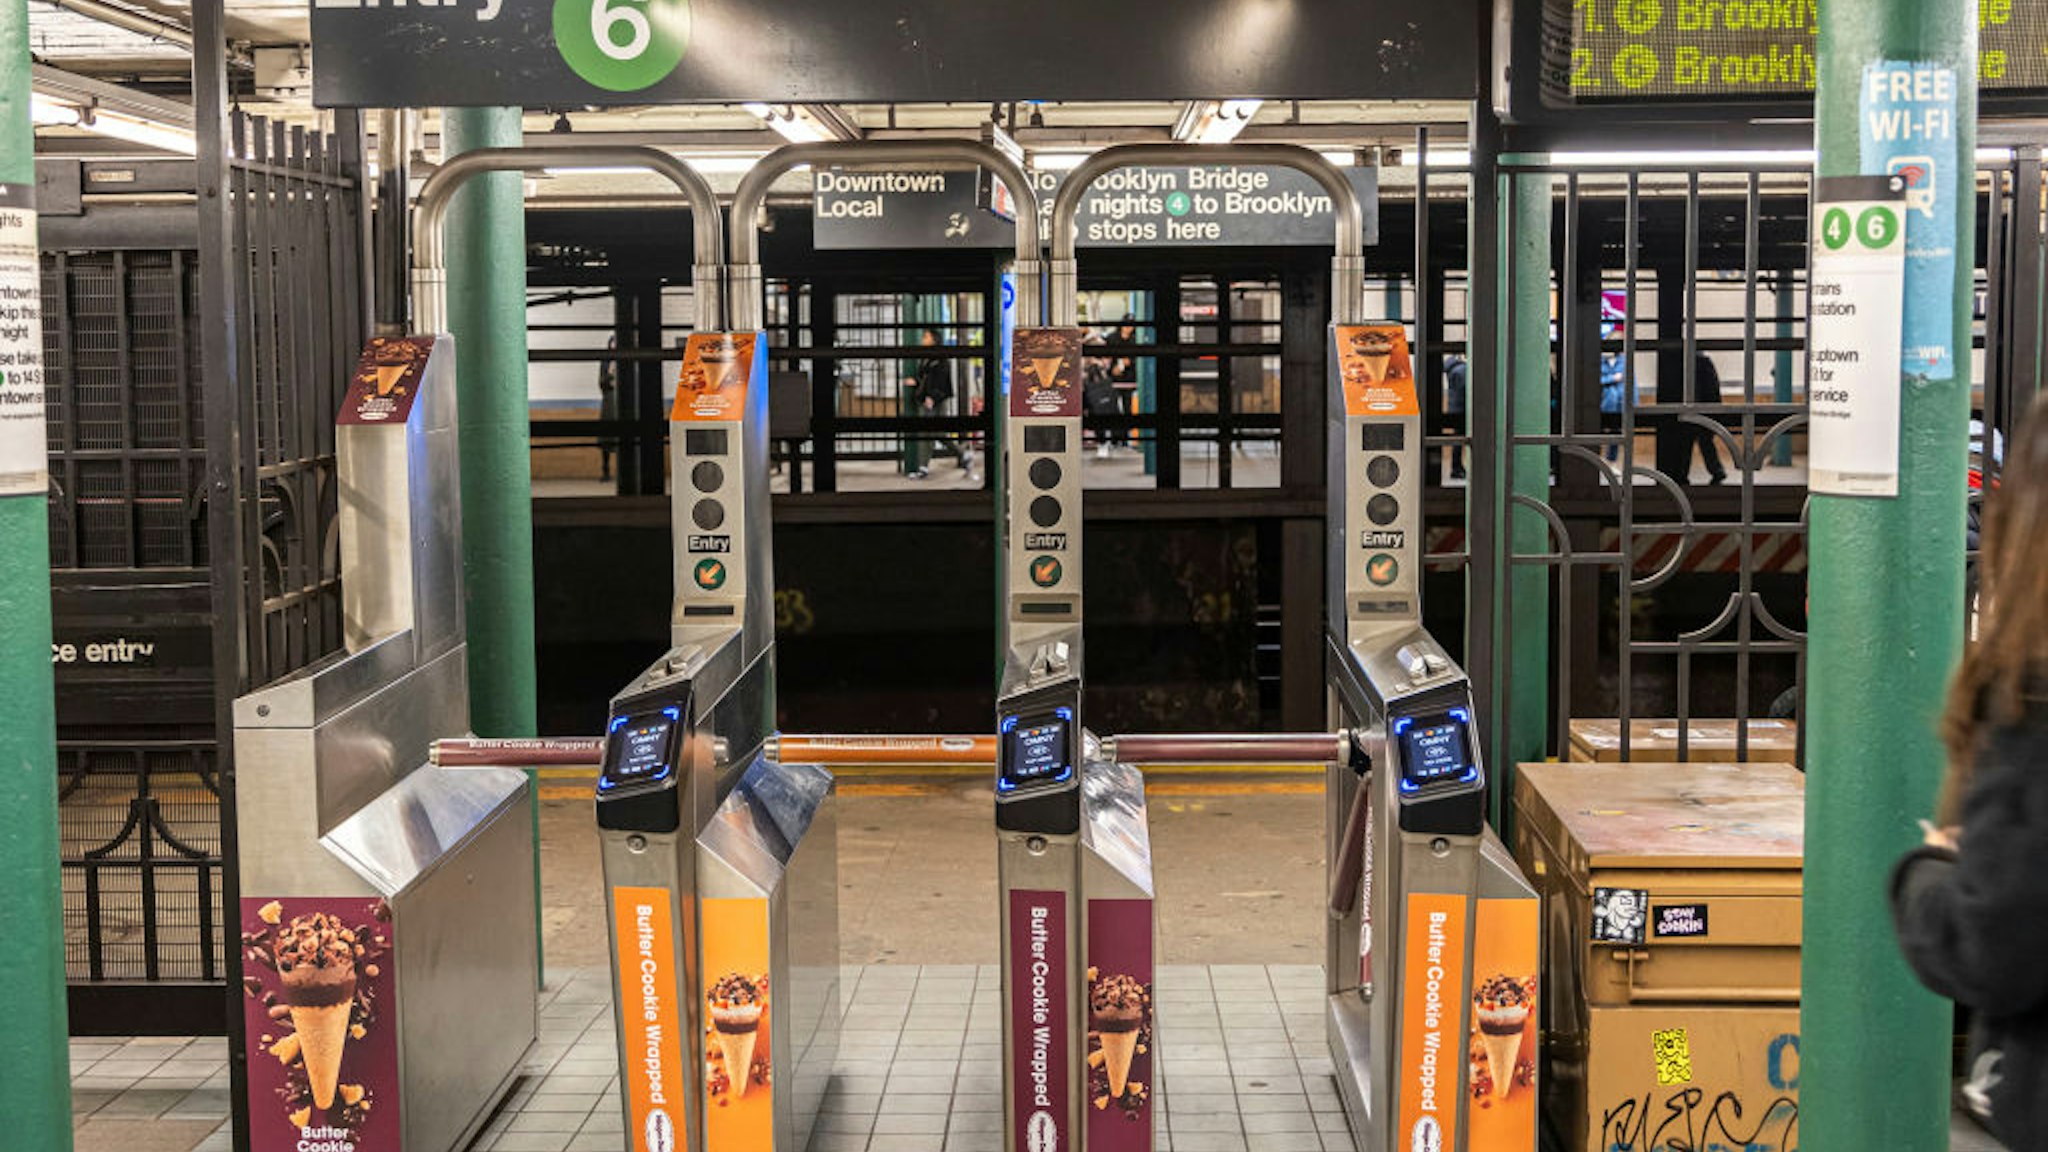 Turnstile entrance before the platform of Spring Street station in Manhattan of the New York City Subway commuter transit system MTA at Little Italy and SoHo. The underground metro station has 2 platforms serving IRT Lexington Avenue Line, Line 4 and 6. New York, United States of America, on May 2023 (Photo by Nicolas Economou/NurPhoto via Getty Images)